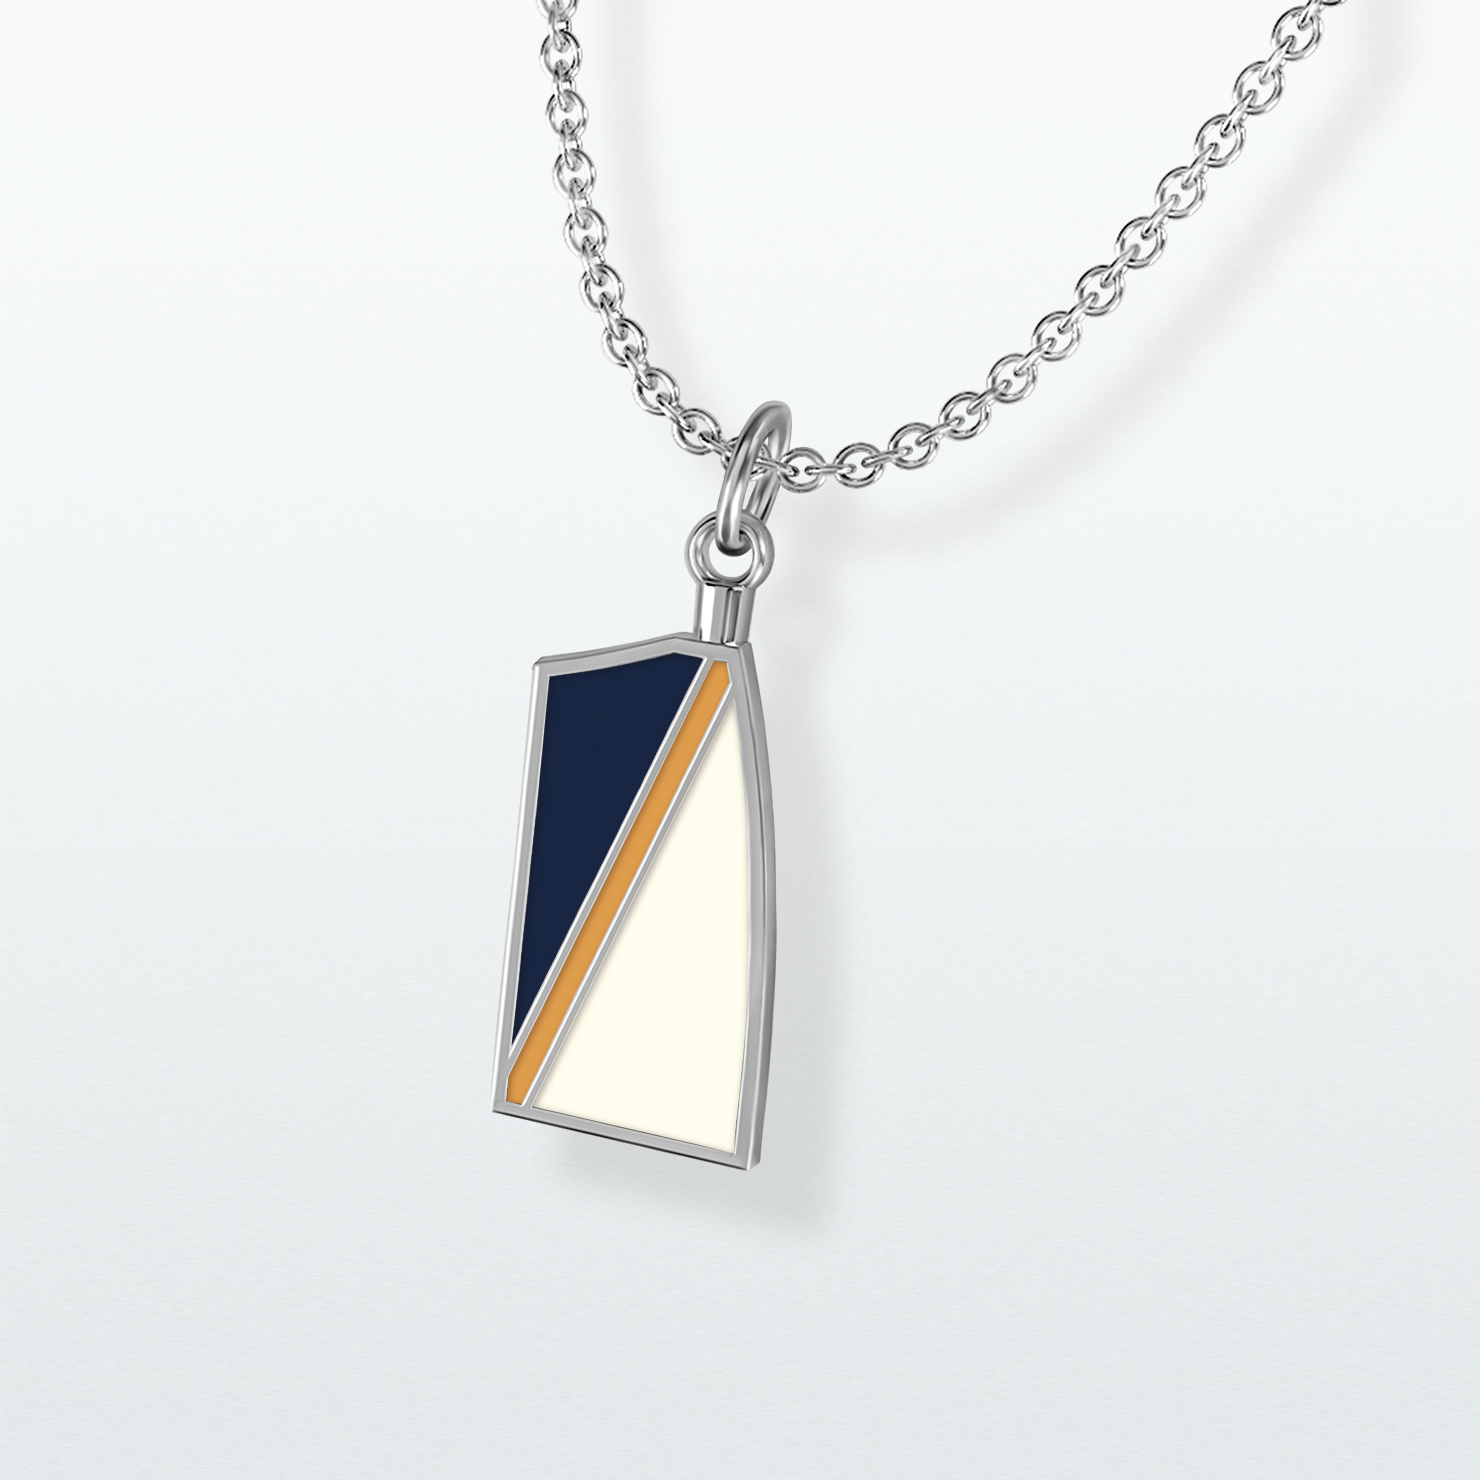 Unionville Pendant - Strokeside Designs Rowing jewelry- Rowing Gifts Ideas- Rowing Coach Gifts